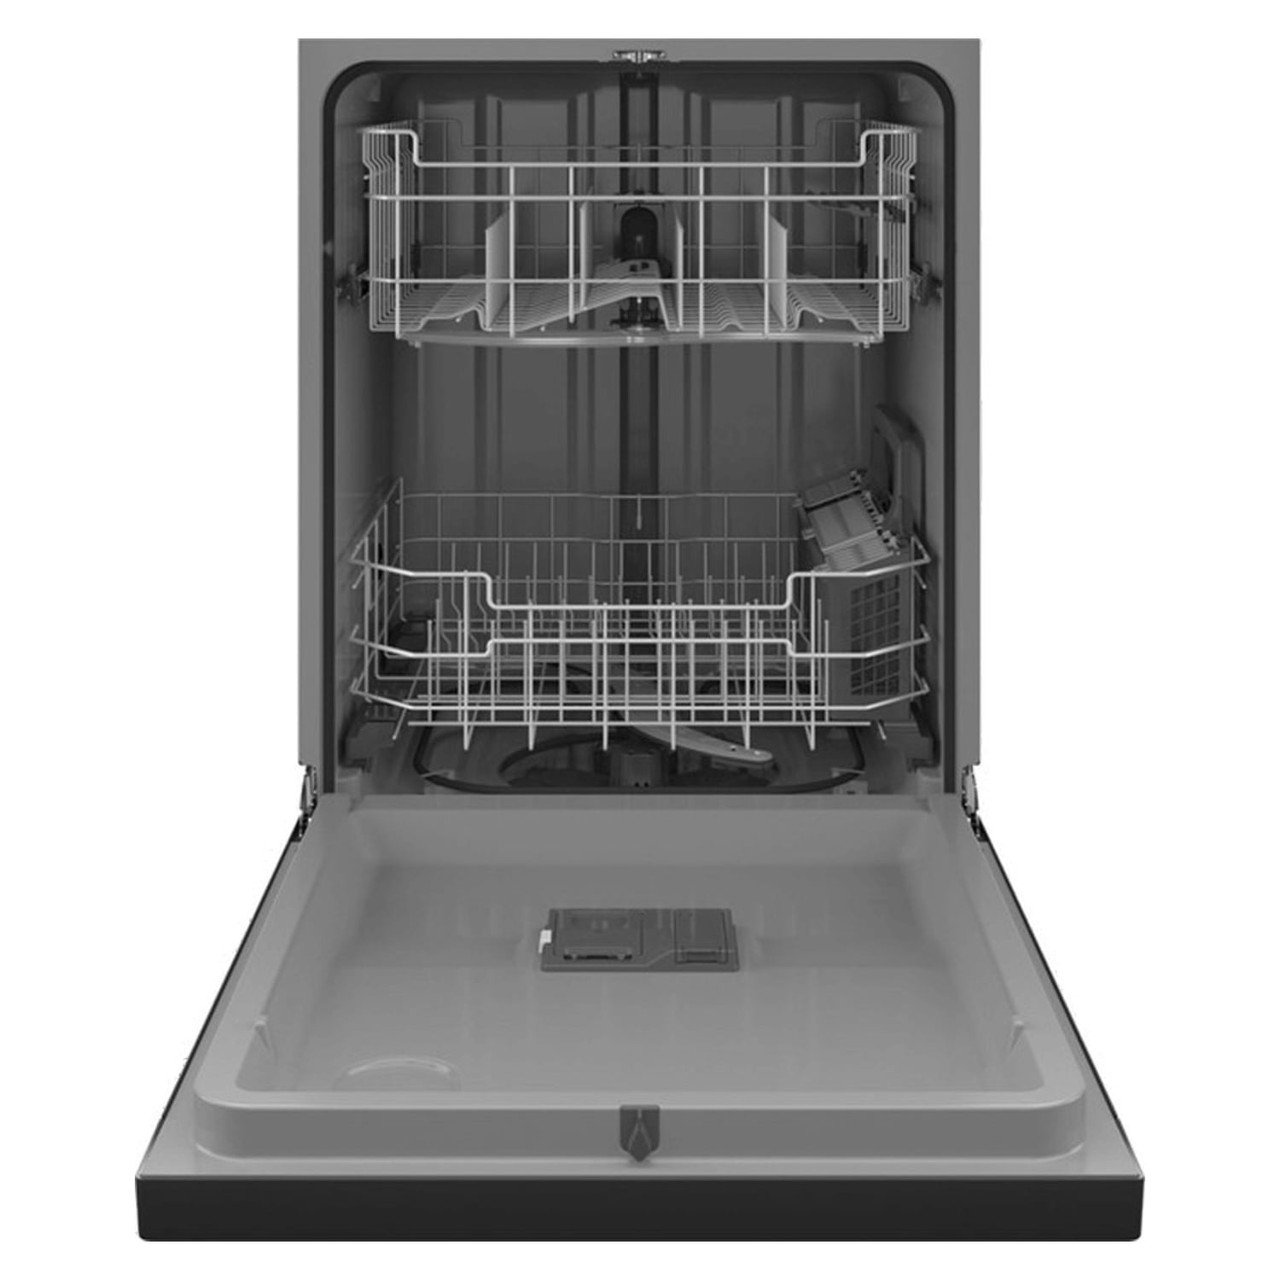 GE Front Control Built-In Dishwasher with Sanitize Cycle & Dry Boost - GDF550PGRBB